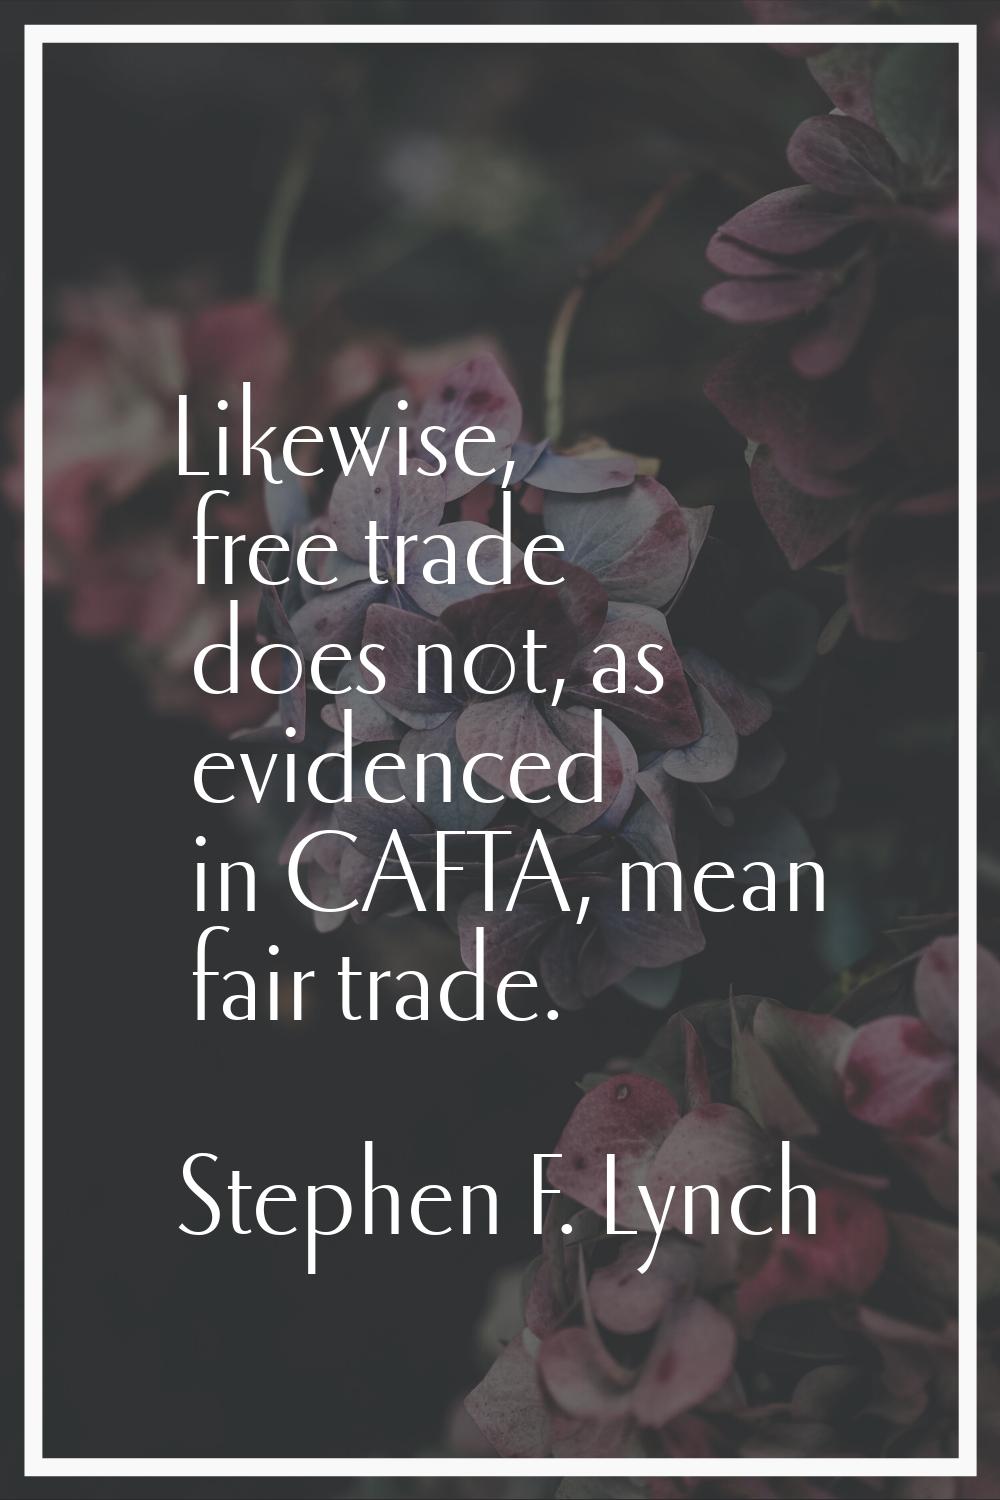 Likewise, free trade does not, as evidenced in CAFTA, mean fair trade.